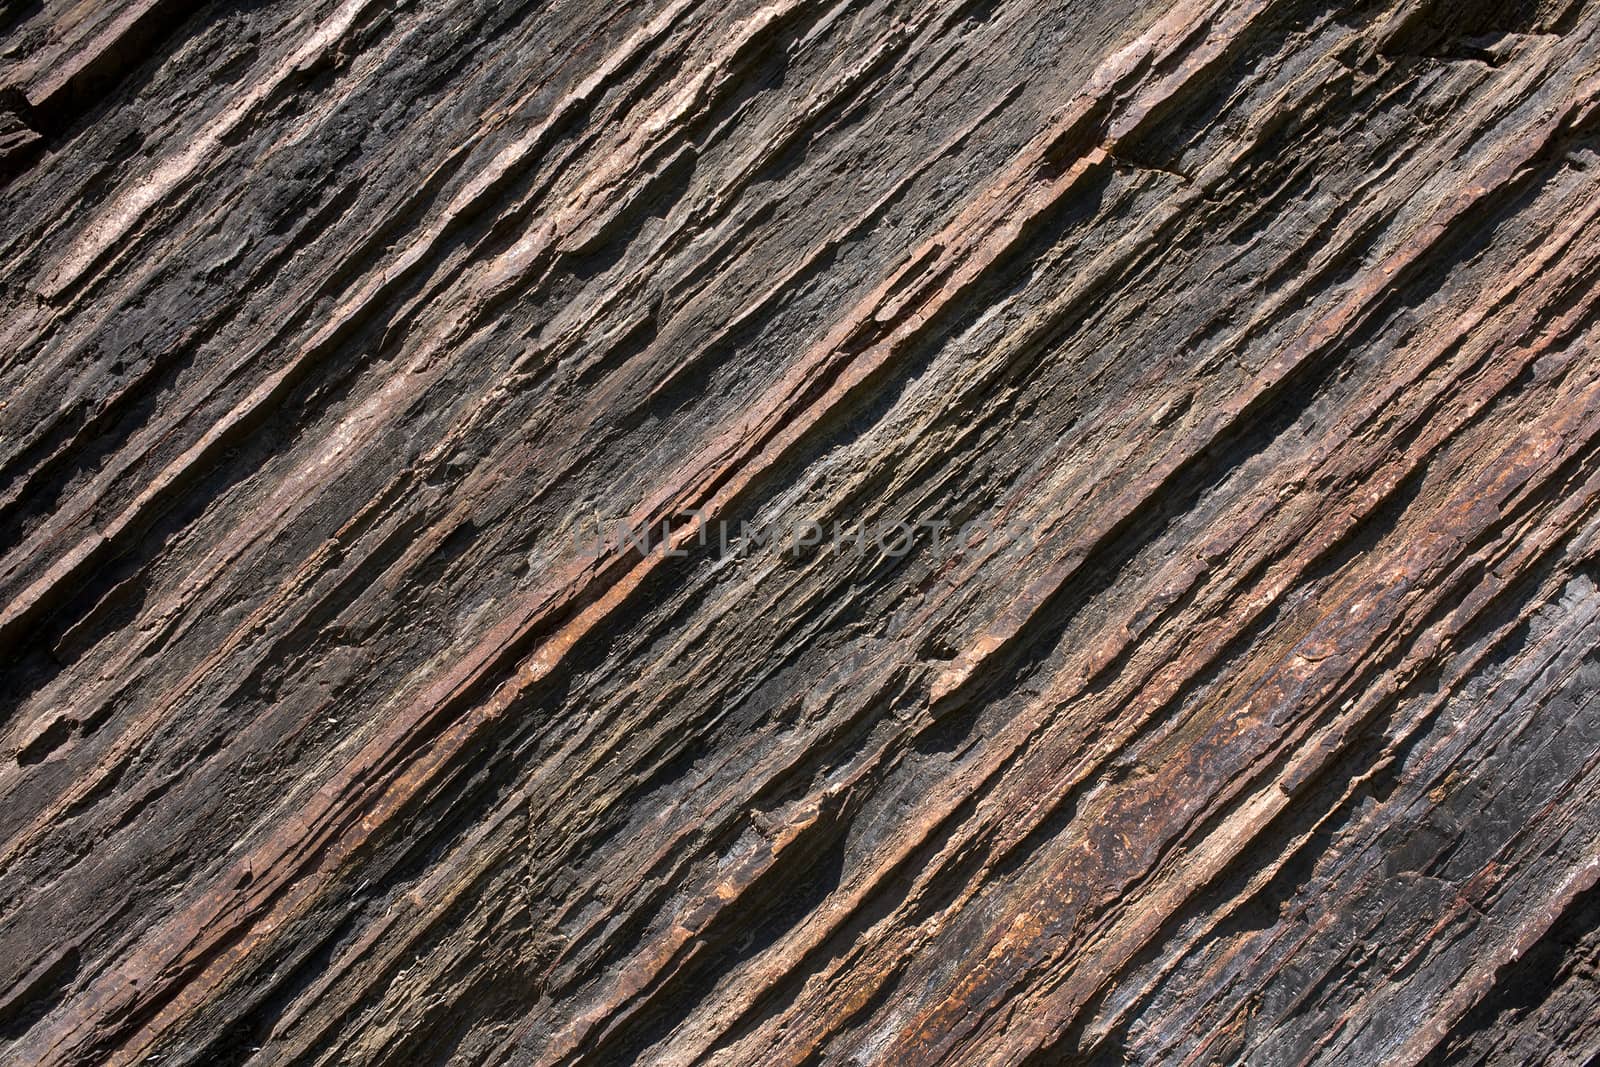 The texture of shale rock by Krakatuk